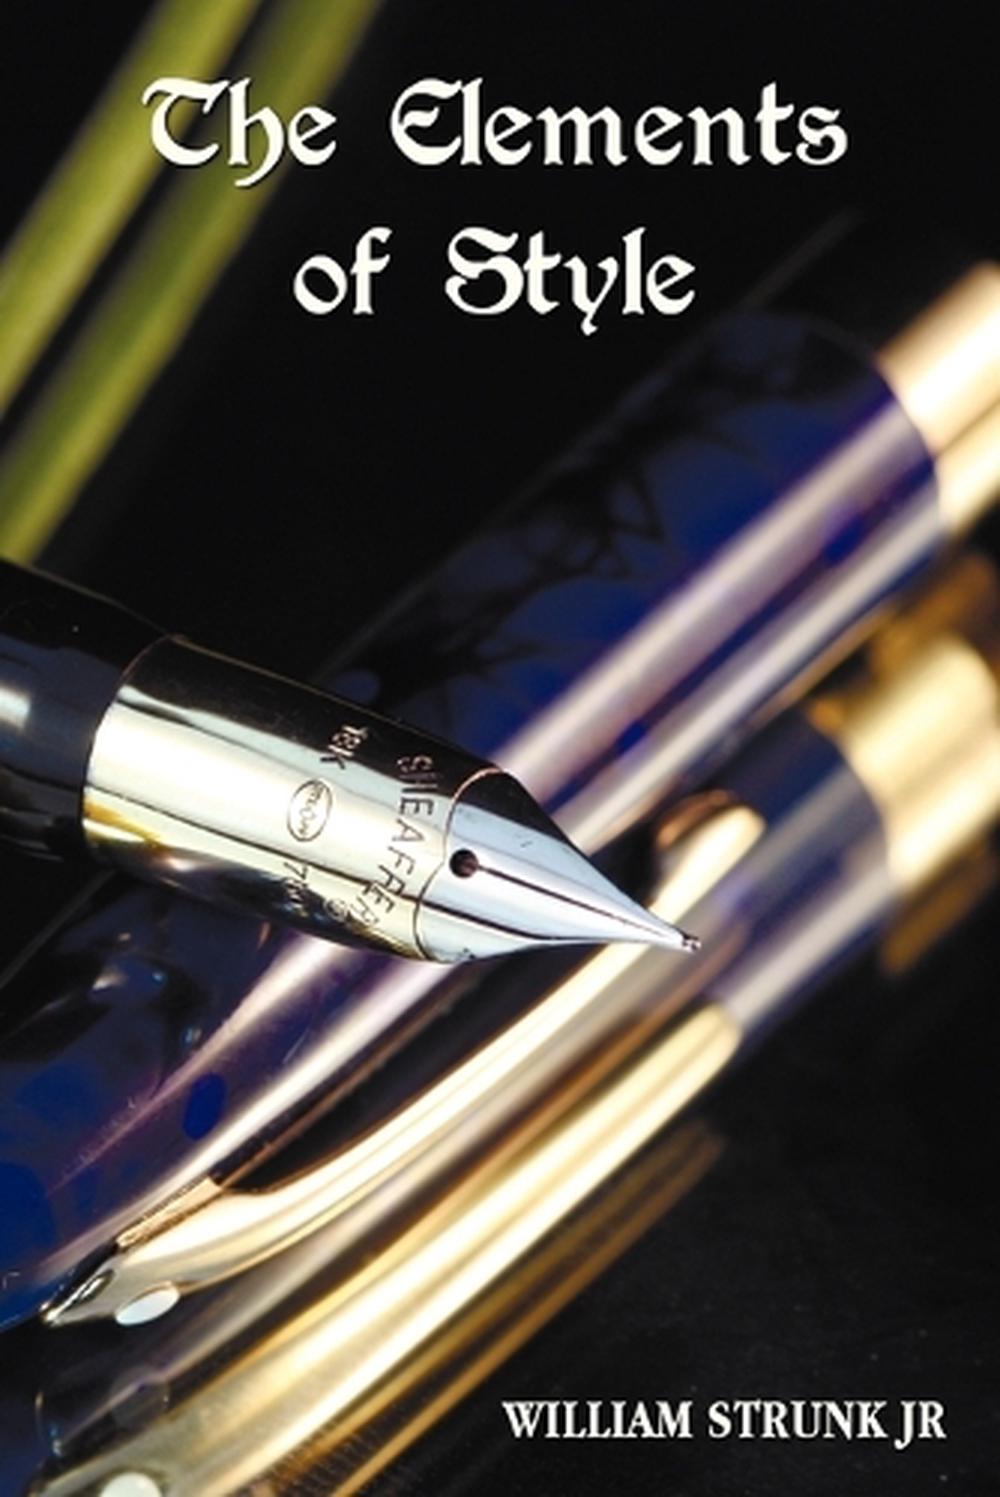 the elements of style by william strunk and eb white